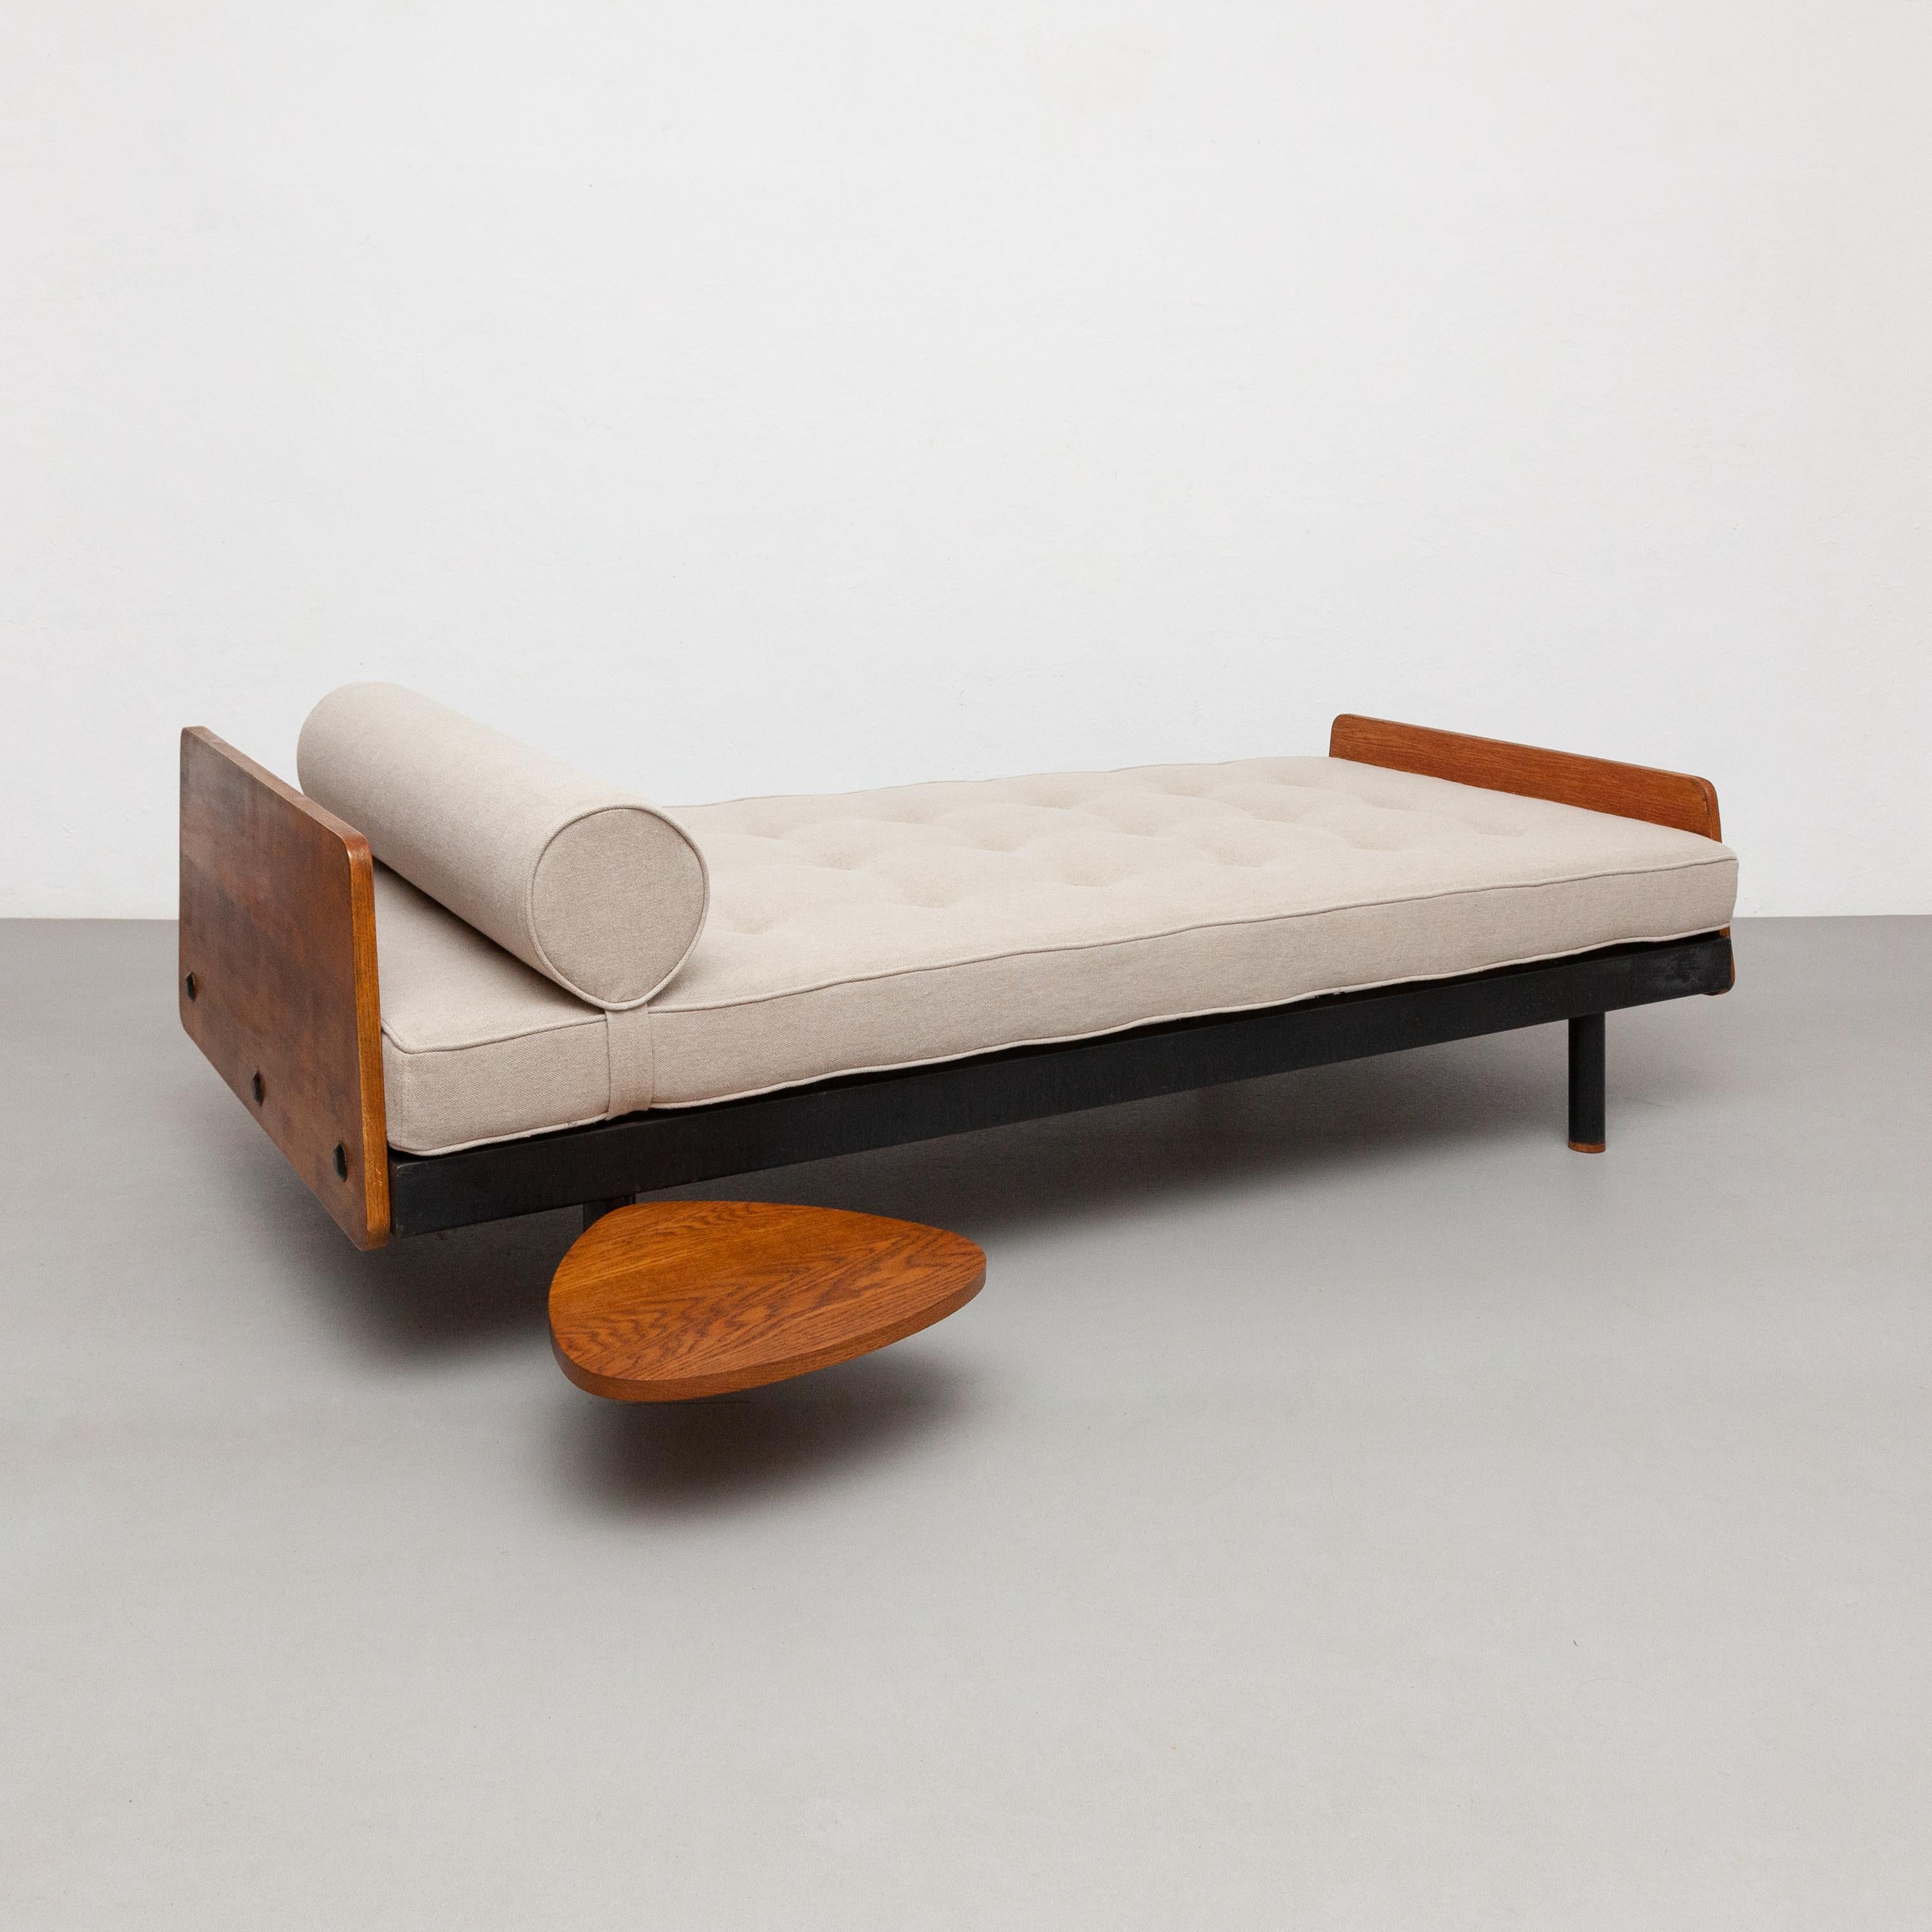 Jean Prouve Mid-Century Modern S.C.A.L. Daybed, circa 1950 1